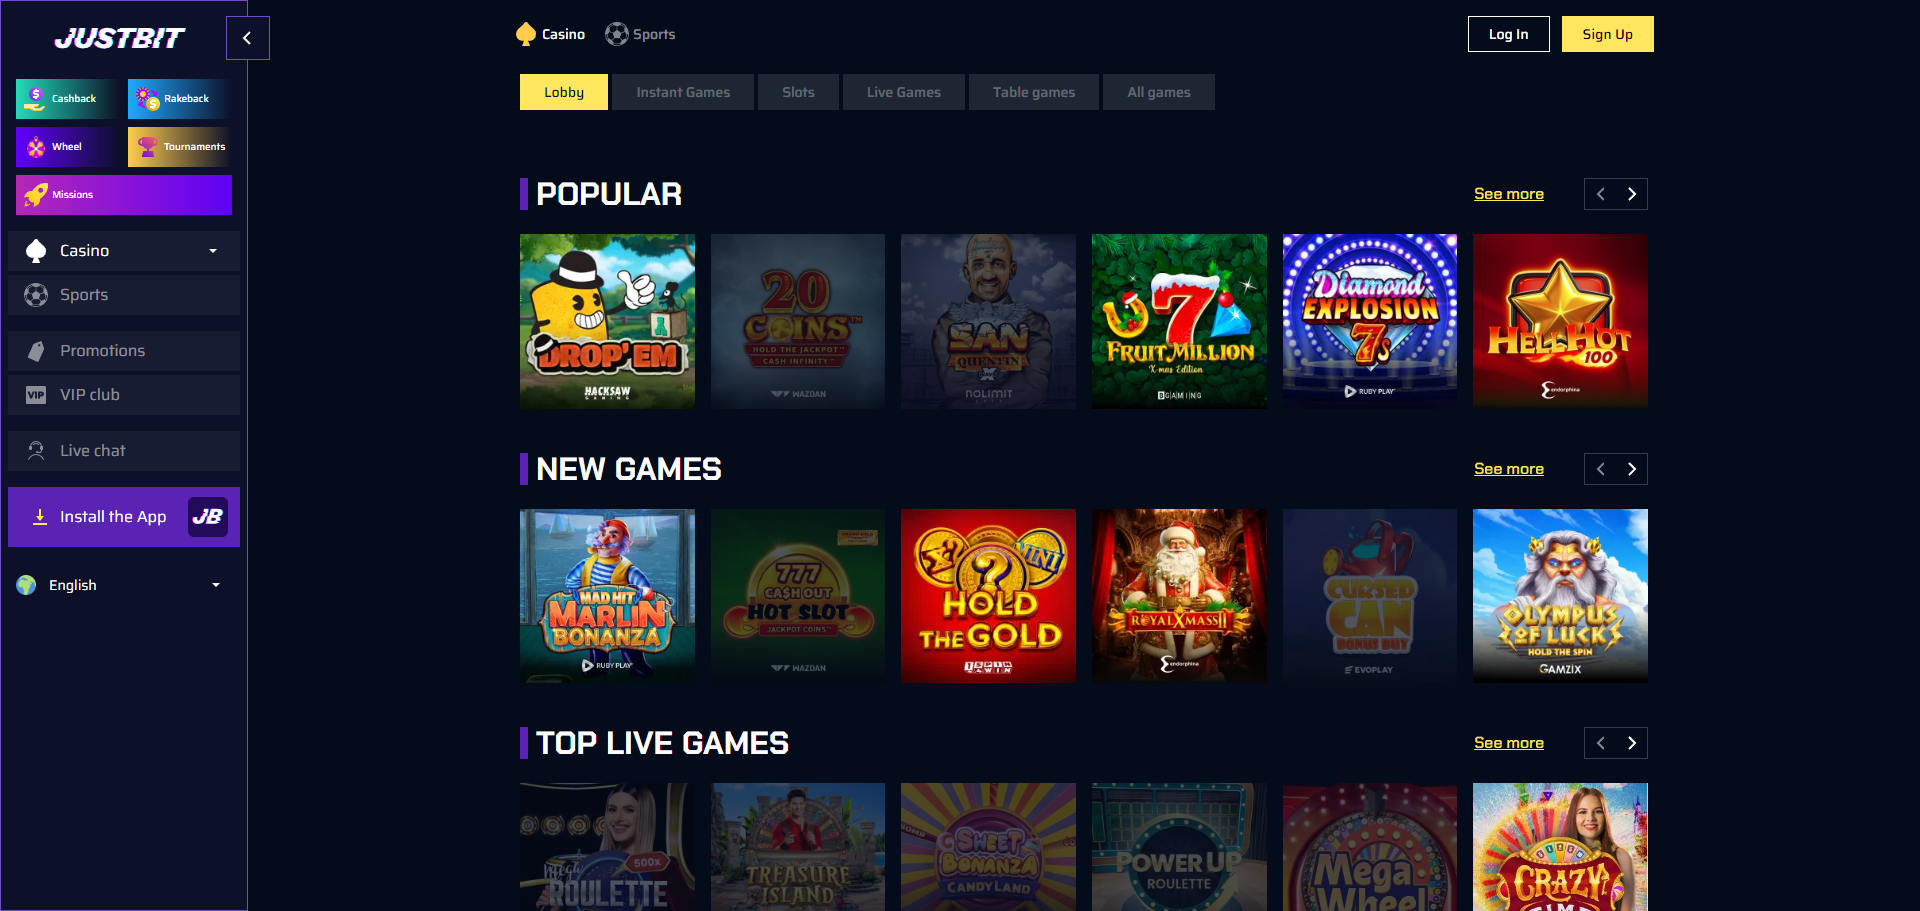 JustBit Casino Review